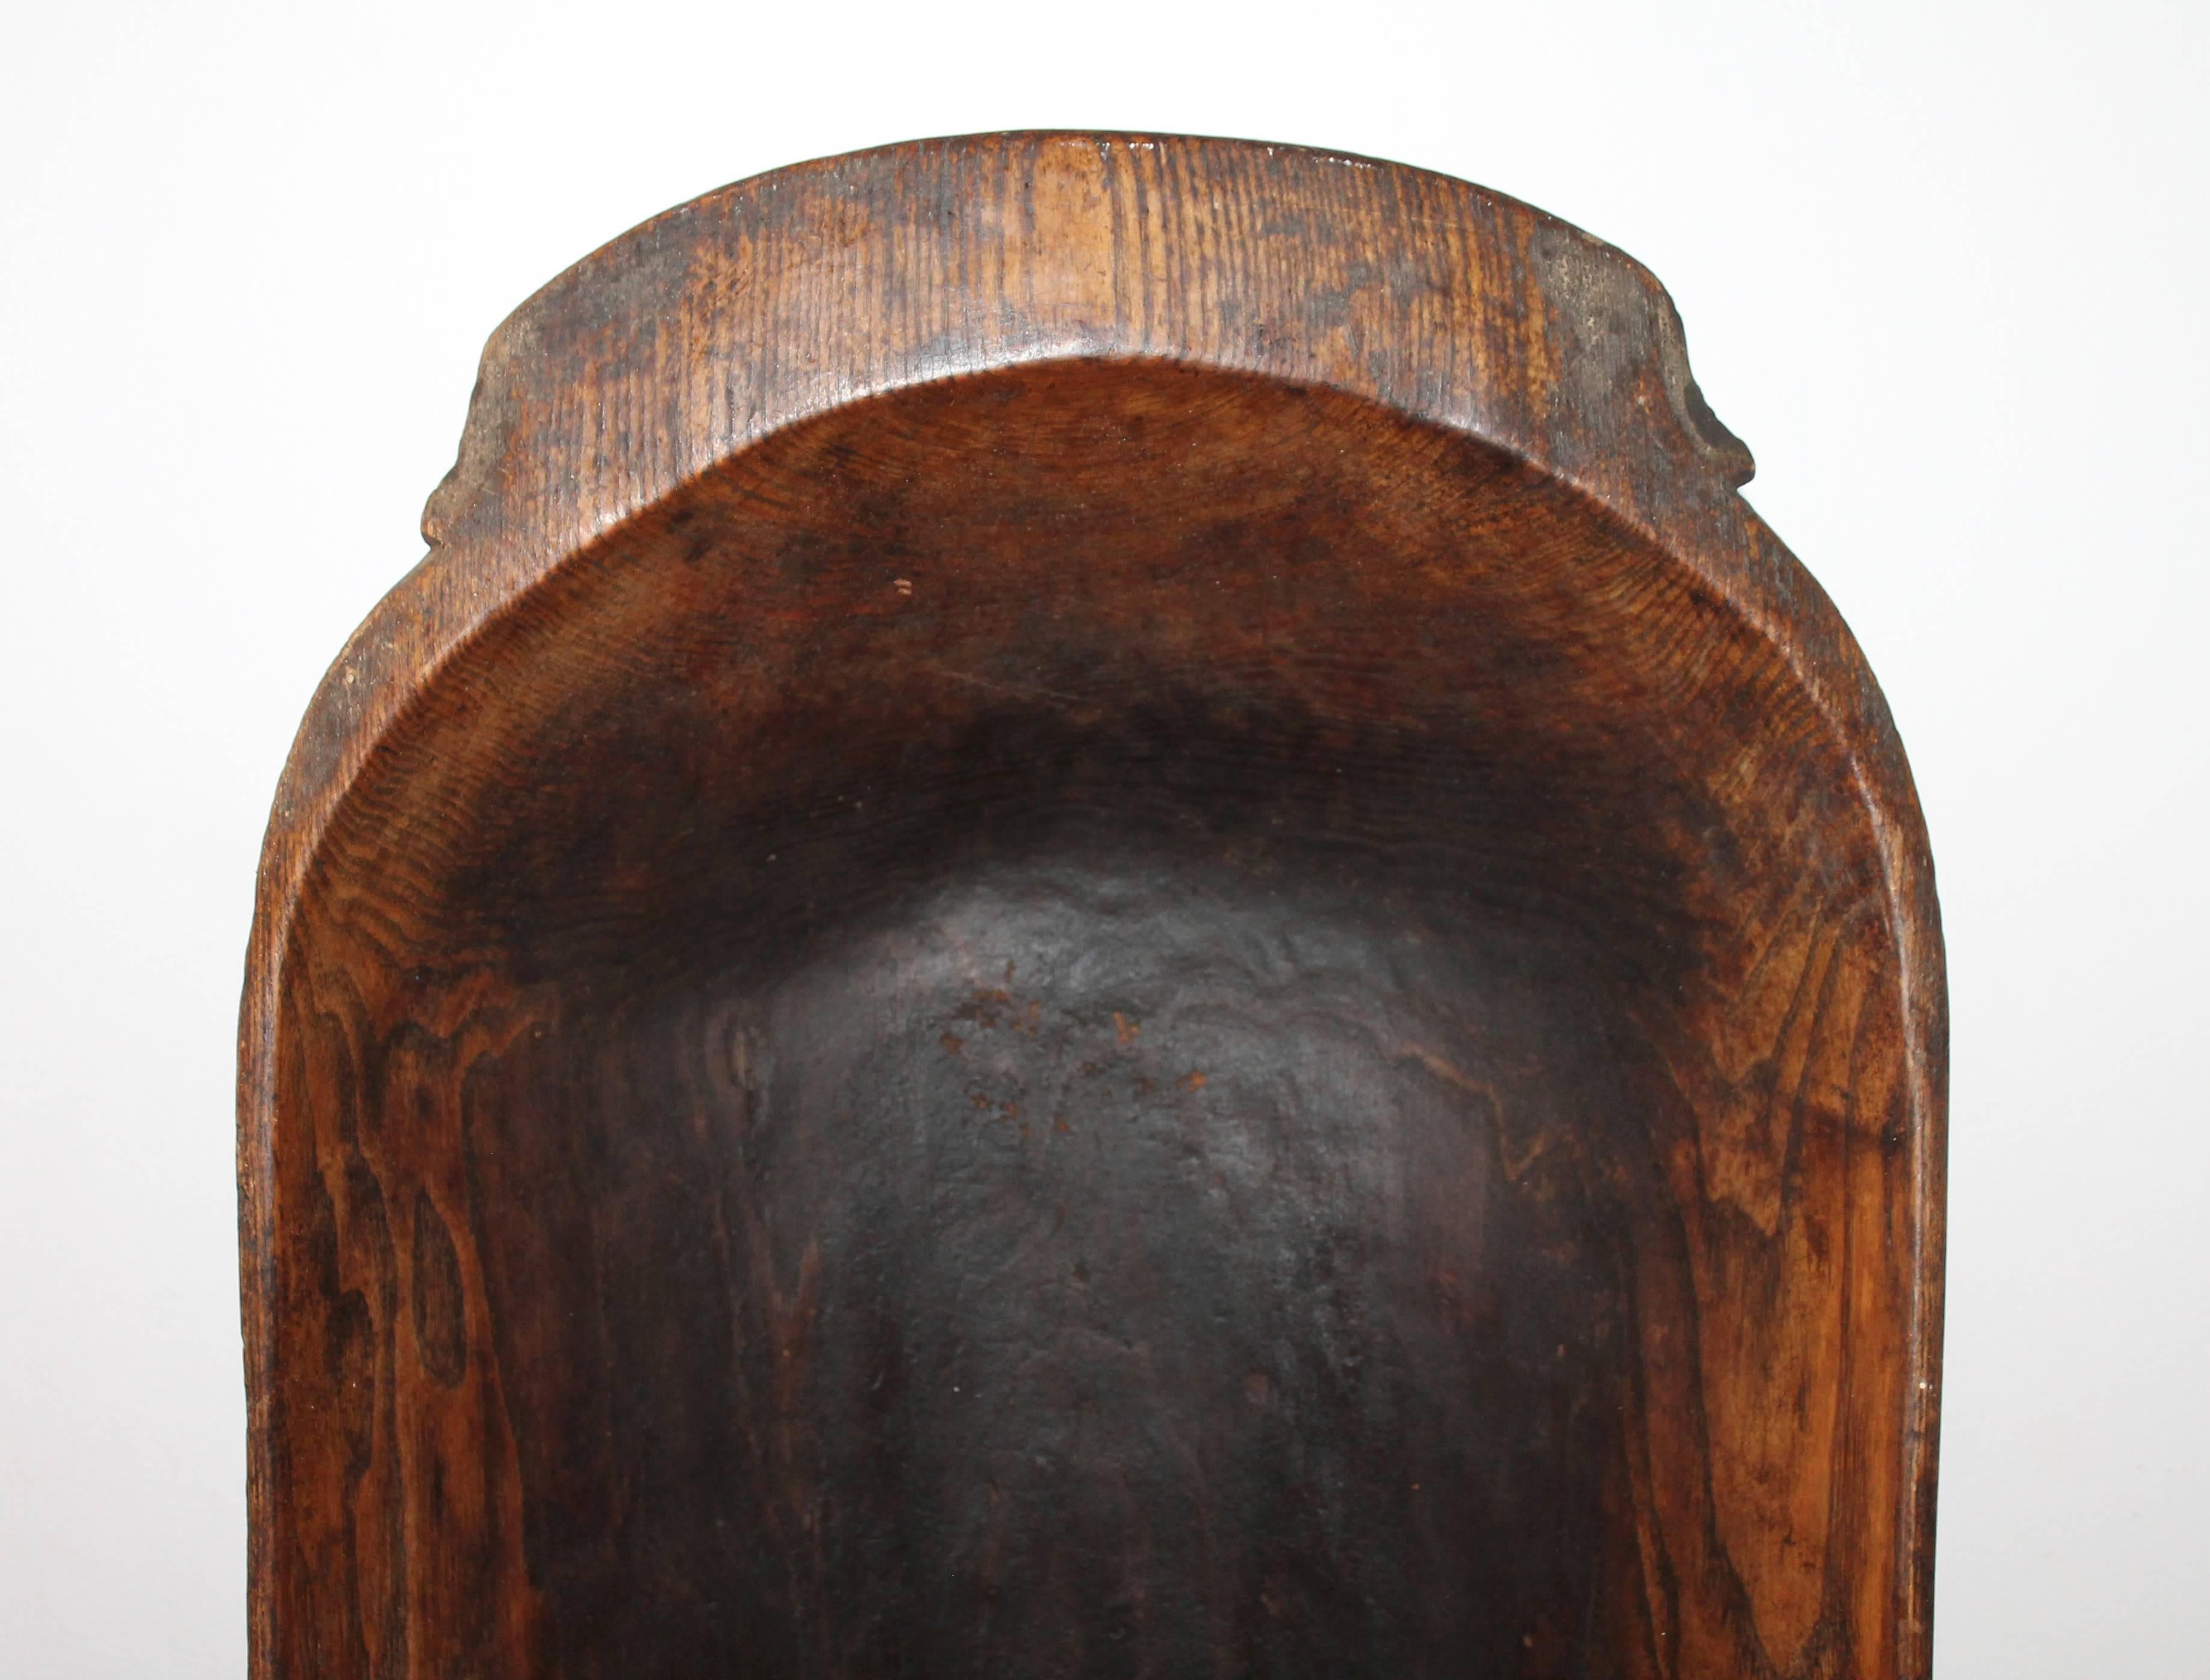 Patinated Early Hand-Carved Monumental Dough Bowl